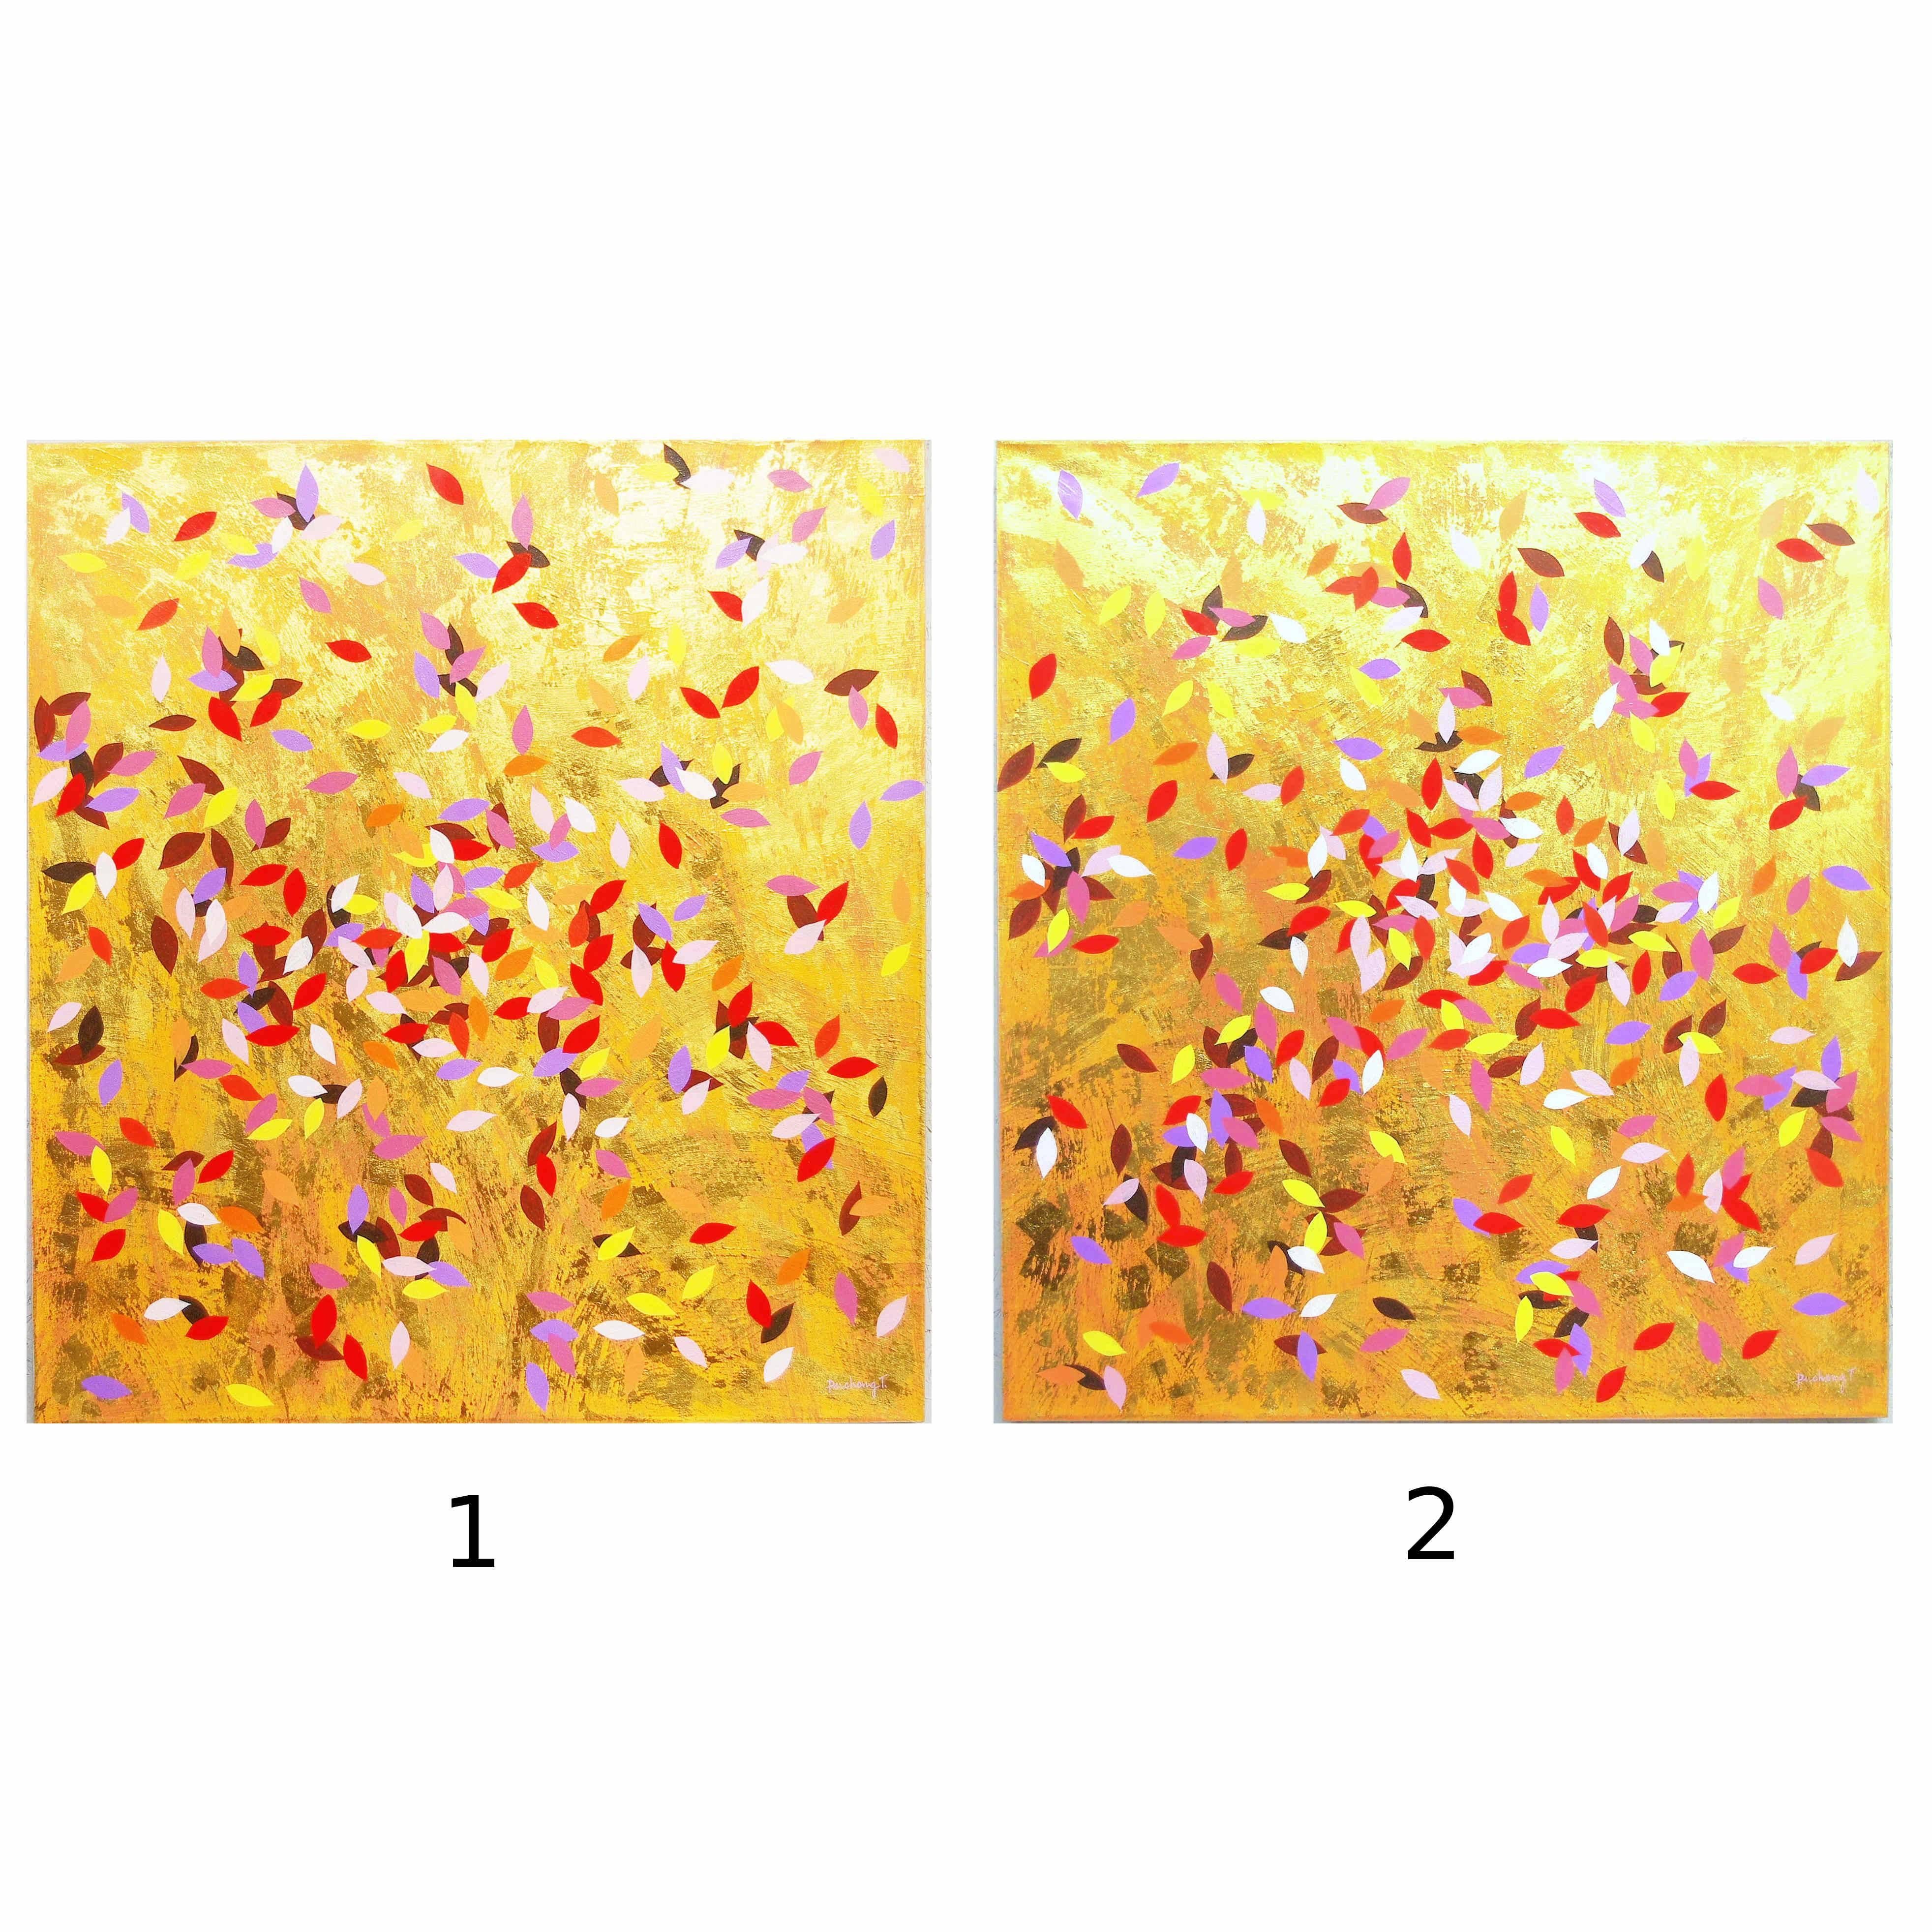 Two modern paintings of Autumn Leaves by Puchong T.
Measures: 39.5